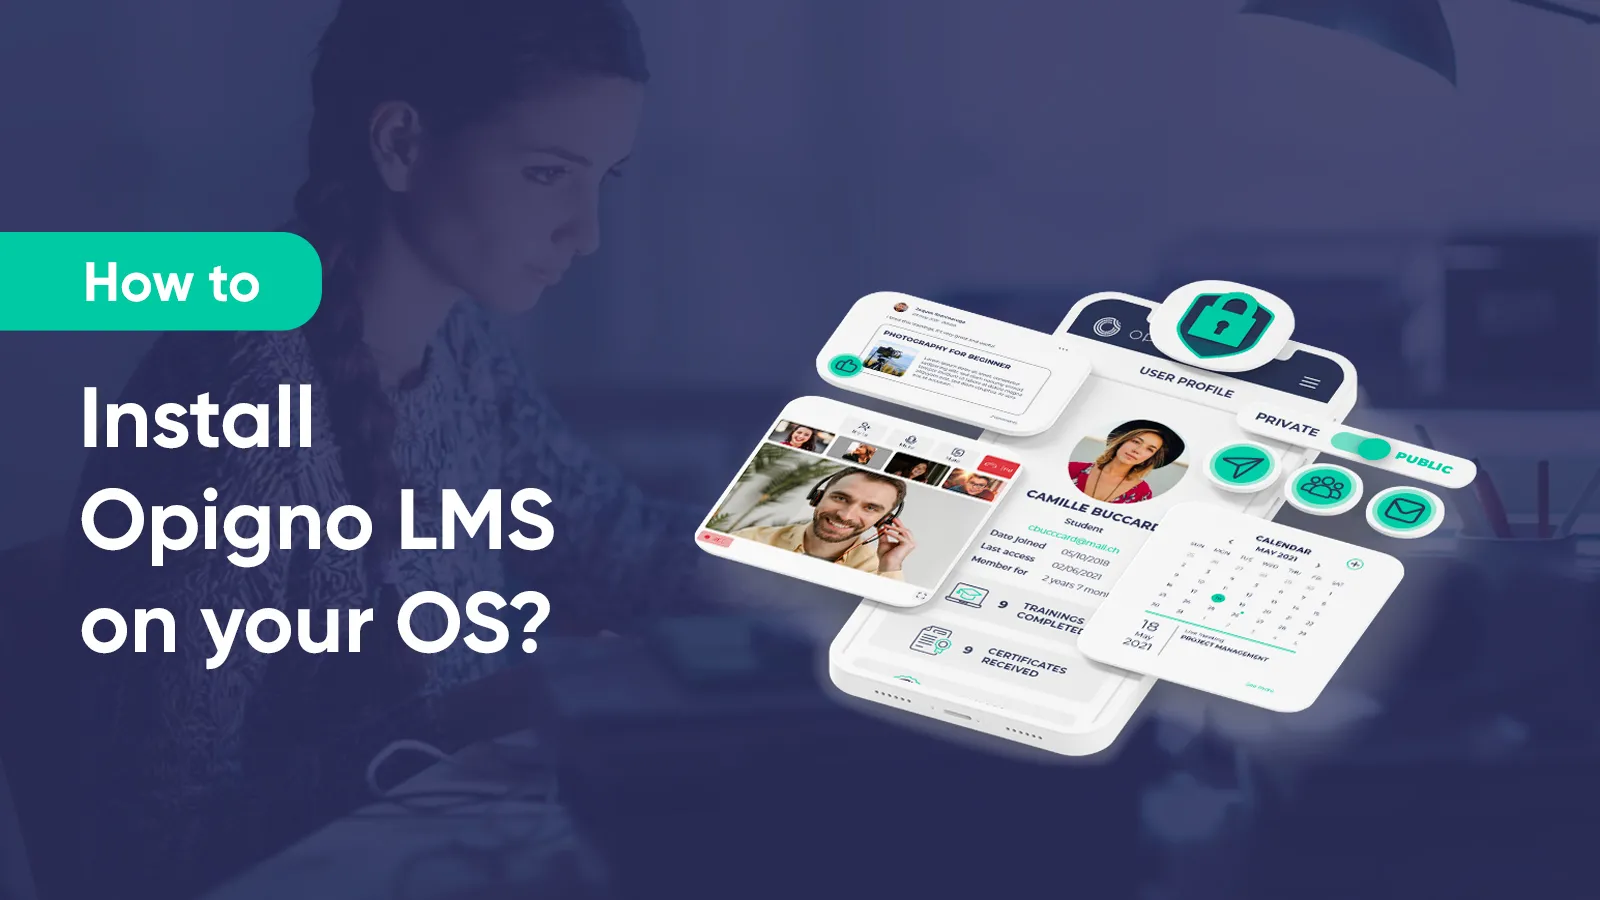 How to Install Opigno LMS